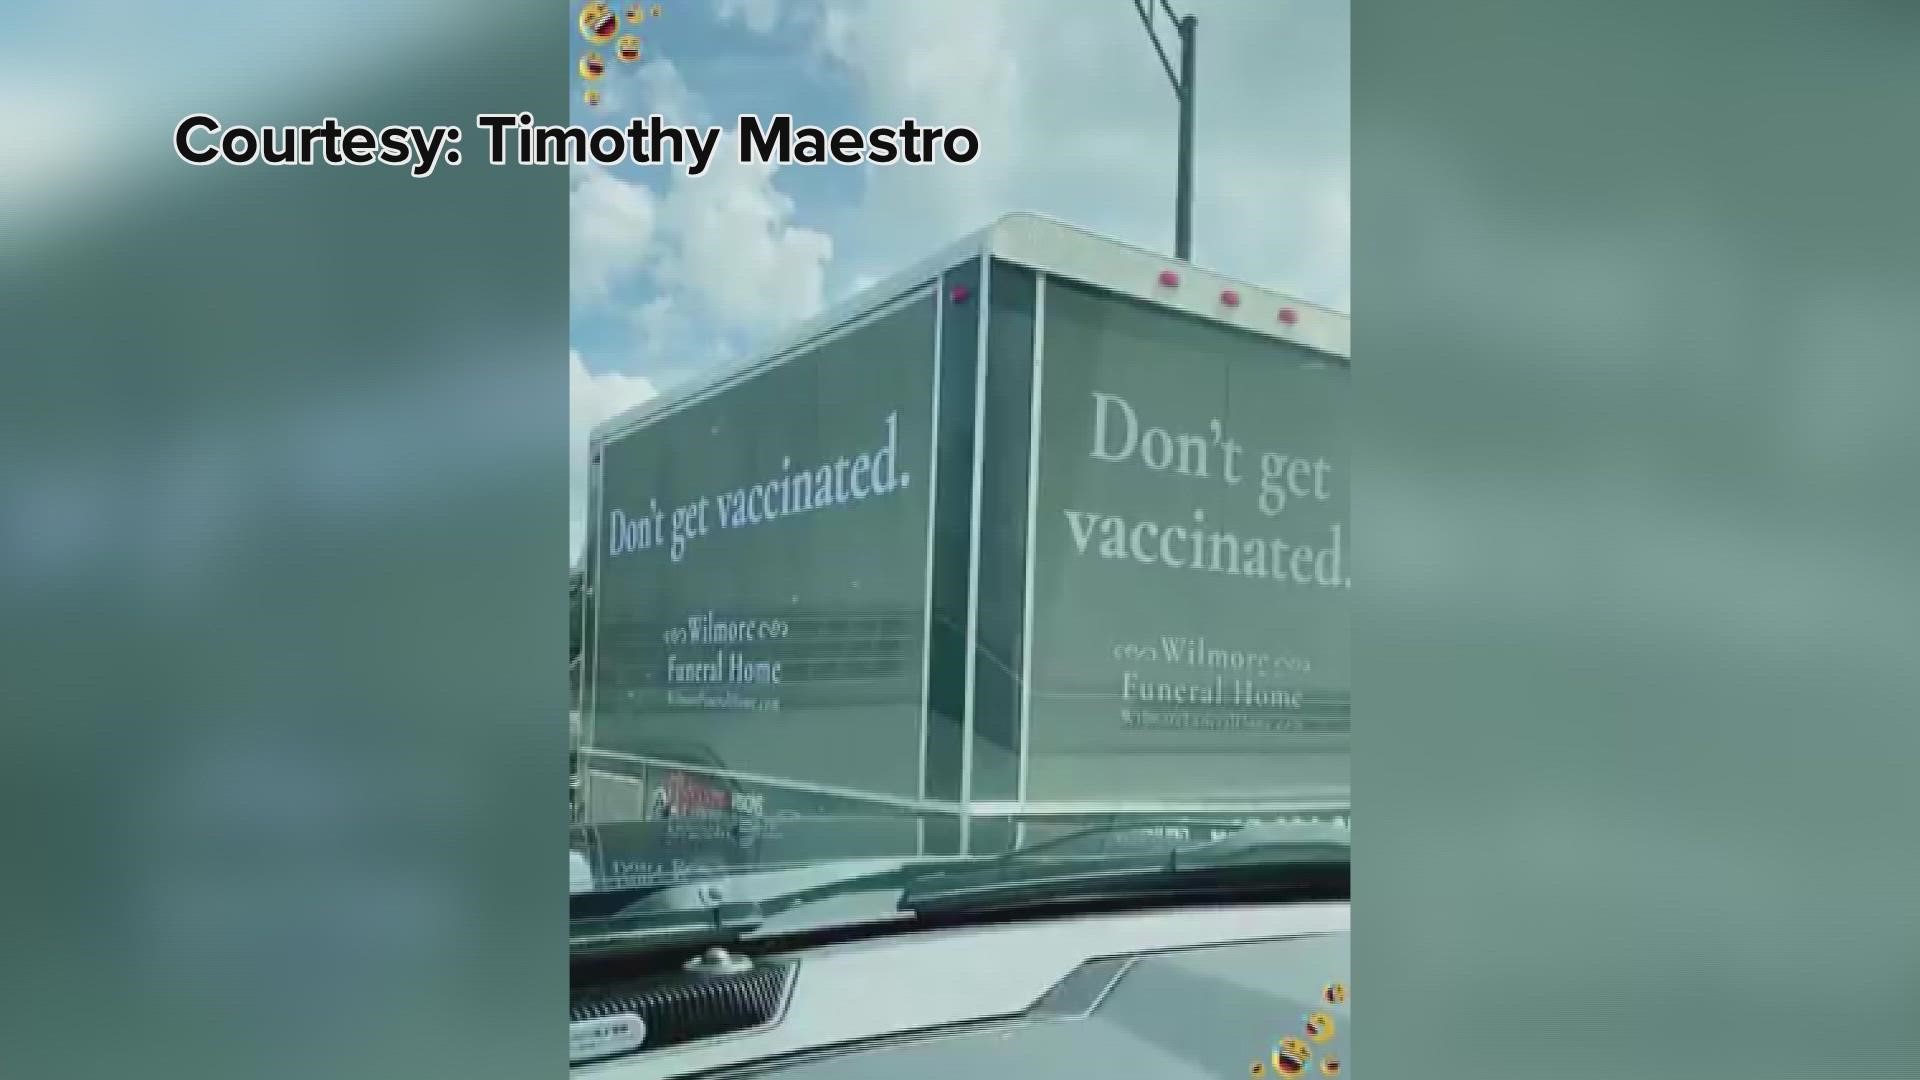 A box truck appearing to advertise a funeral home was actually a publicity stunt encouraging COVID-19 vaccines in Charlotte.